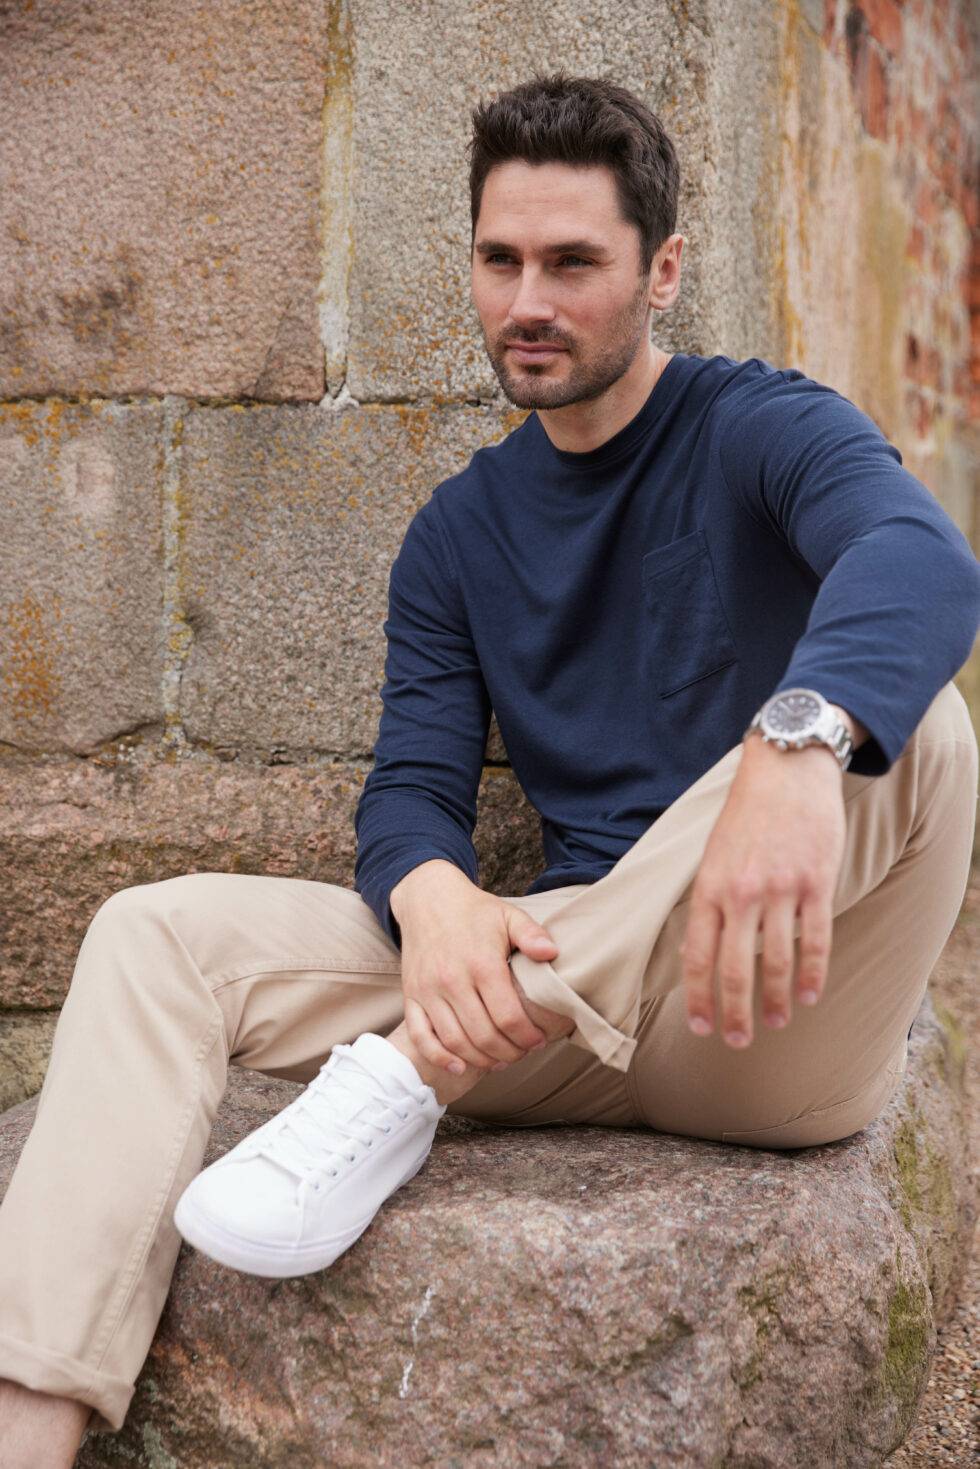 Durable and elegant | Belika - knitwear for the modern man